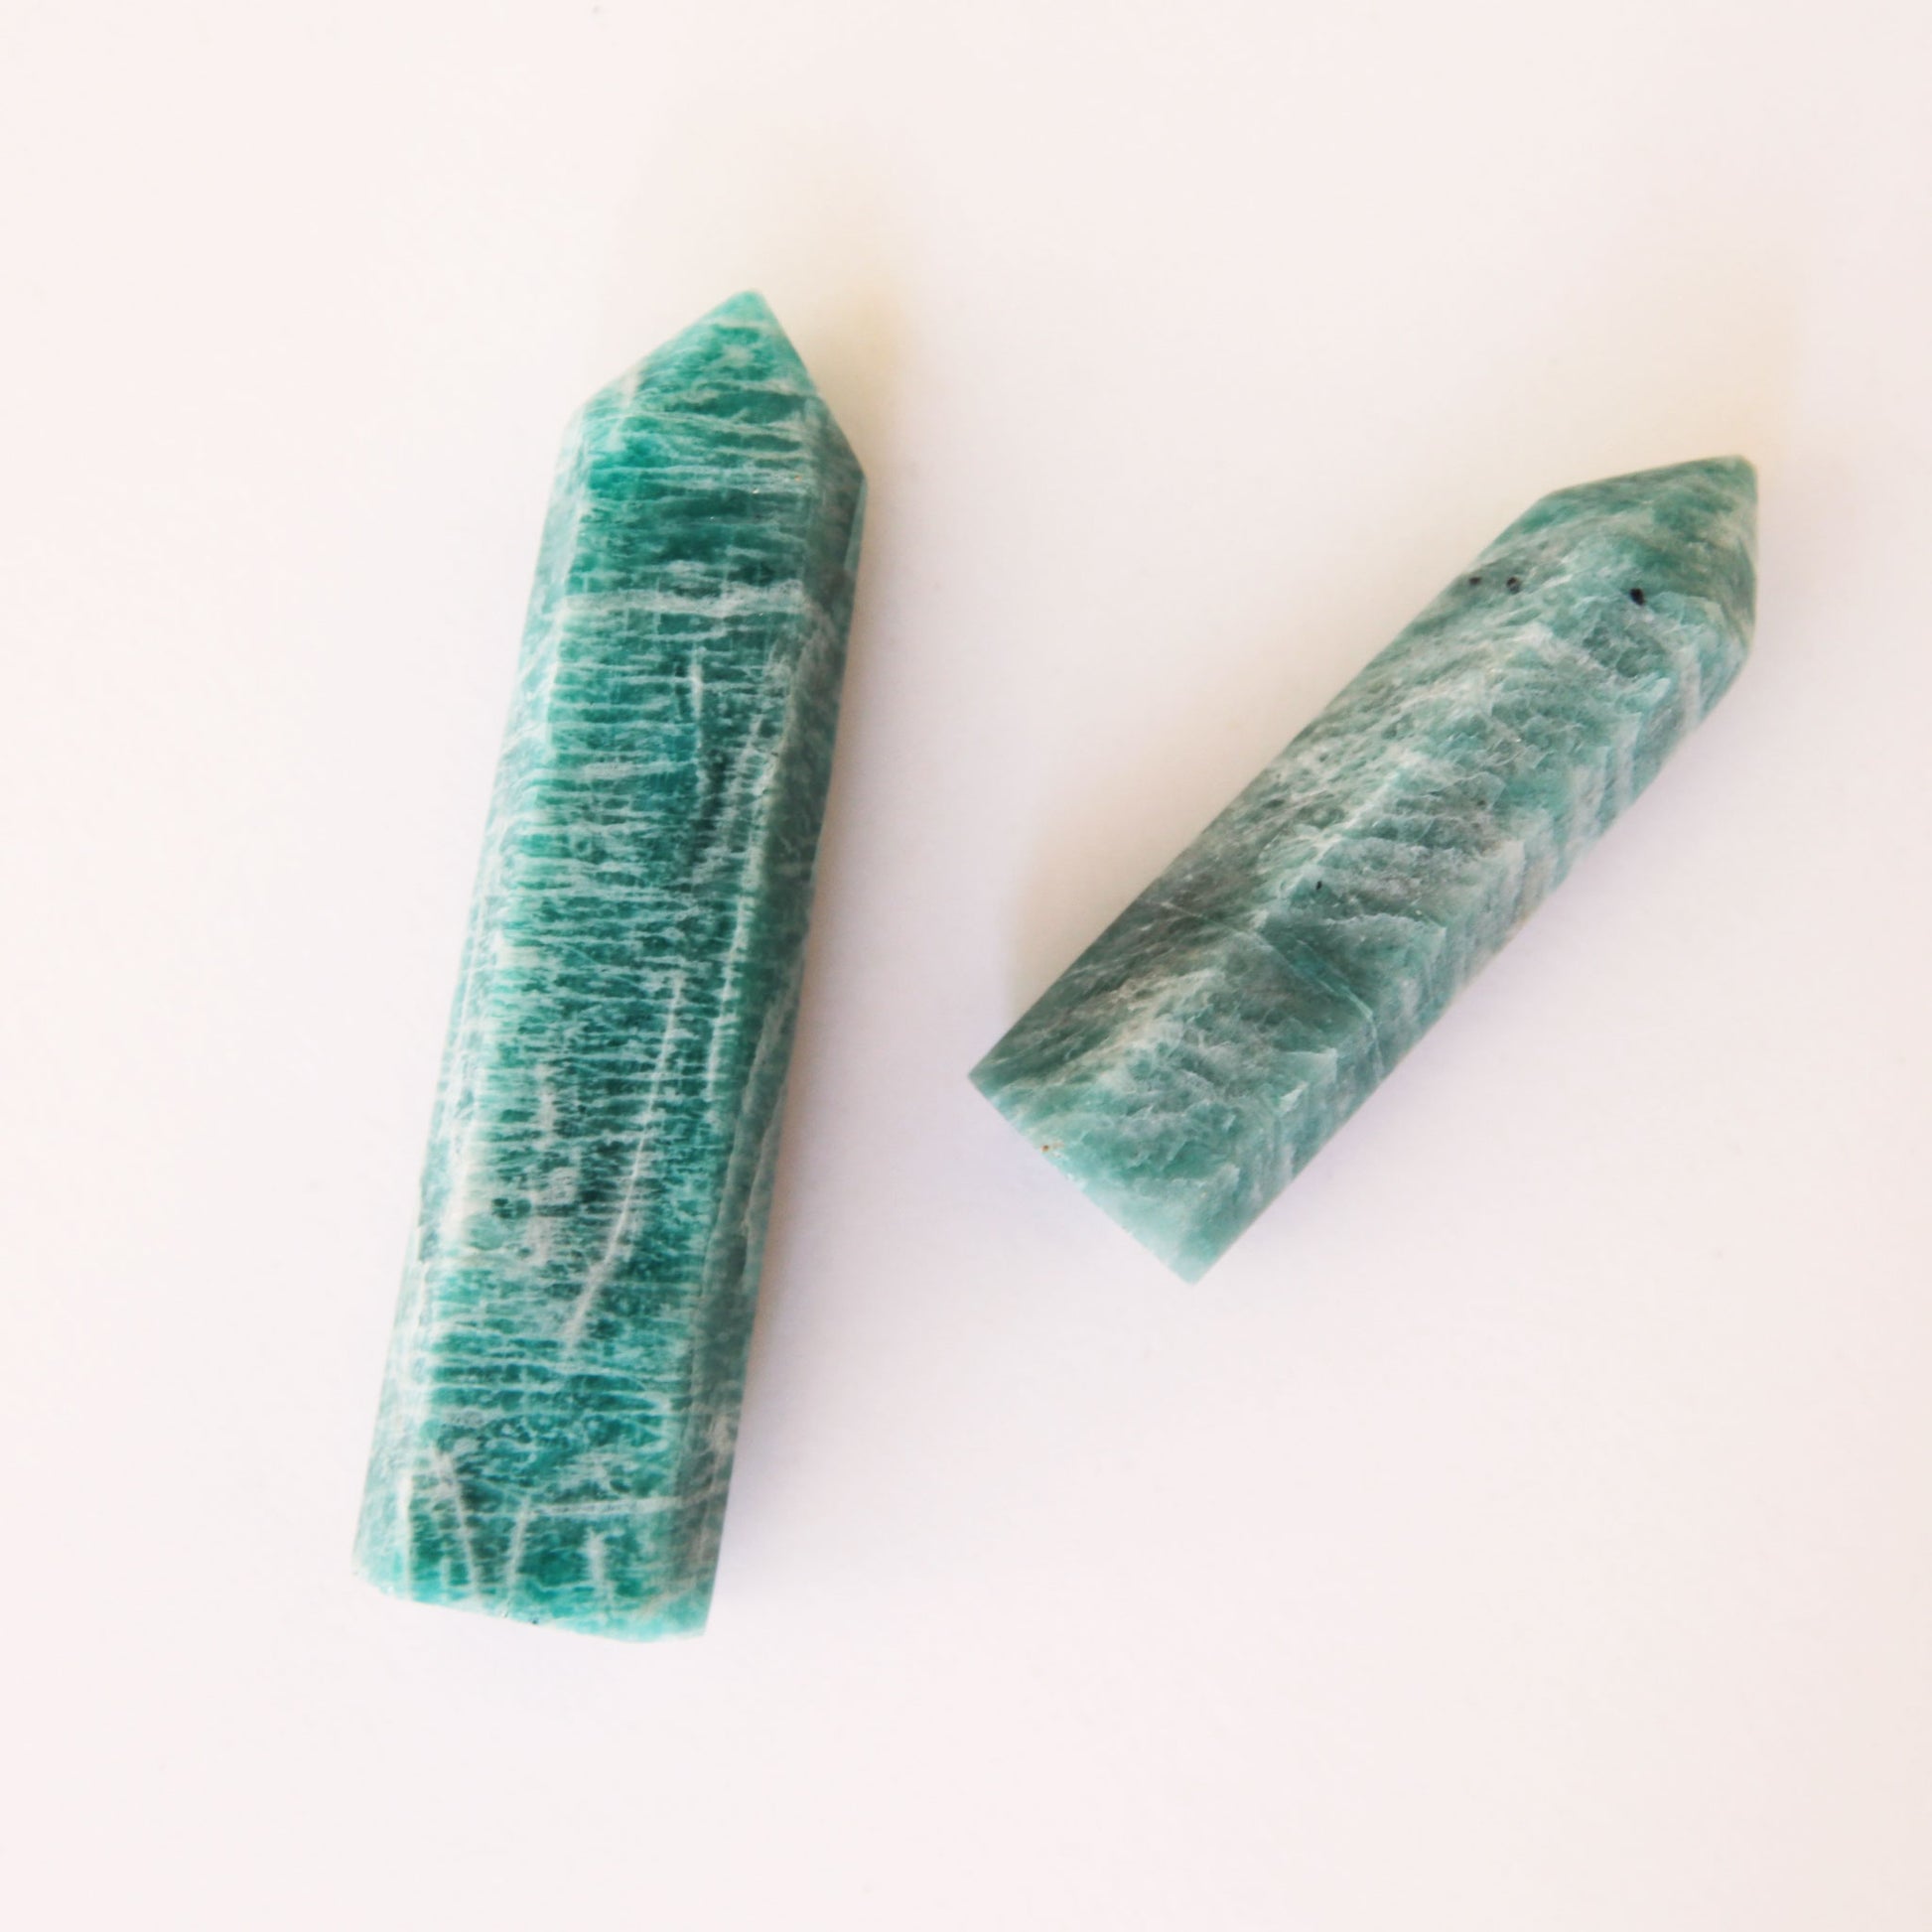 A photo of two amazonite crystals, teal blue in color with white accents. The two sizes represent the two sizes available for purchase. Each crystal is sold separately. These amazonite crystals are in the shape of a point and are flat on the bottom to allow them to be freestanding.